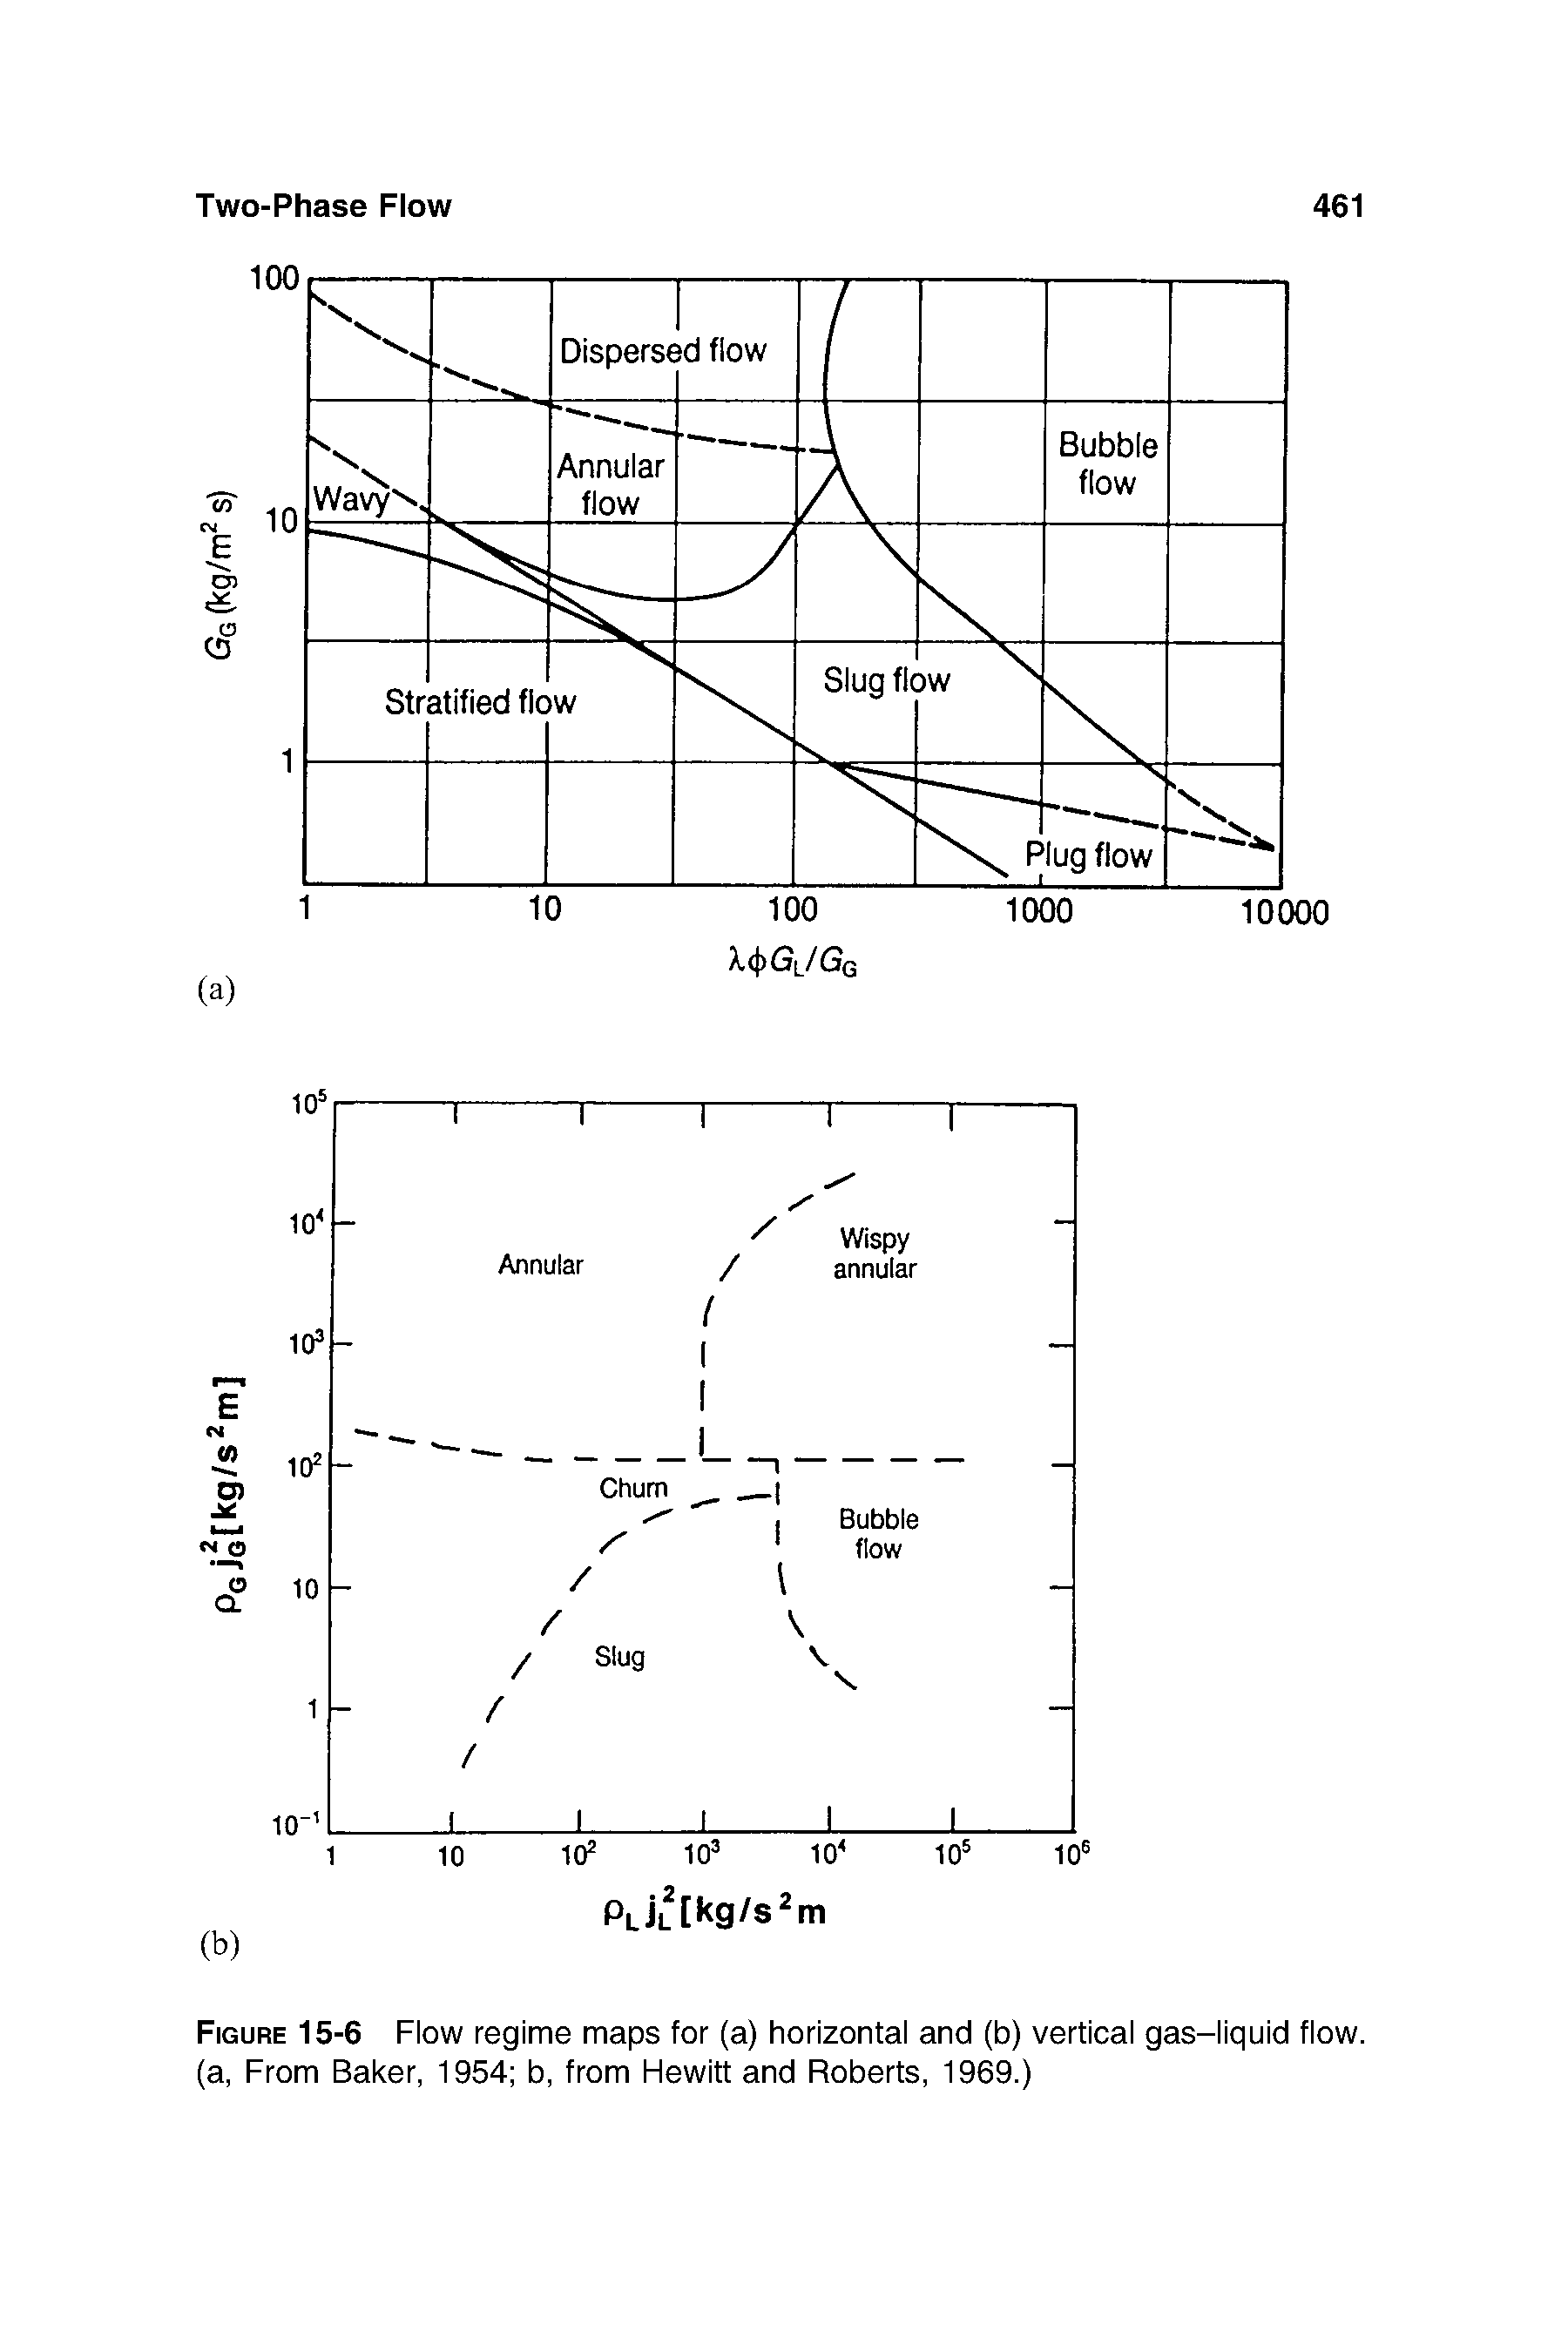 Figure 15-6 Flow regime maps for (a) horizontal and (b) vertical gas-liquid flow, (a, From Baker, 1954 b, from Hewitt and Roberts, 1969.)...